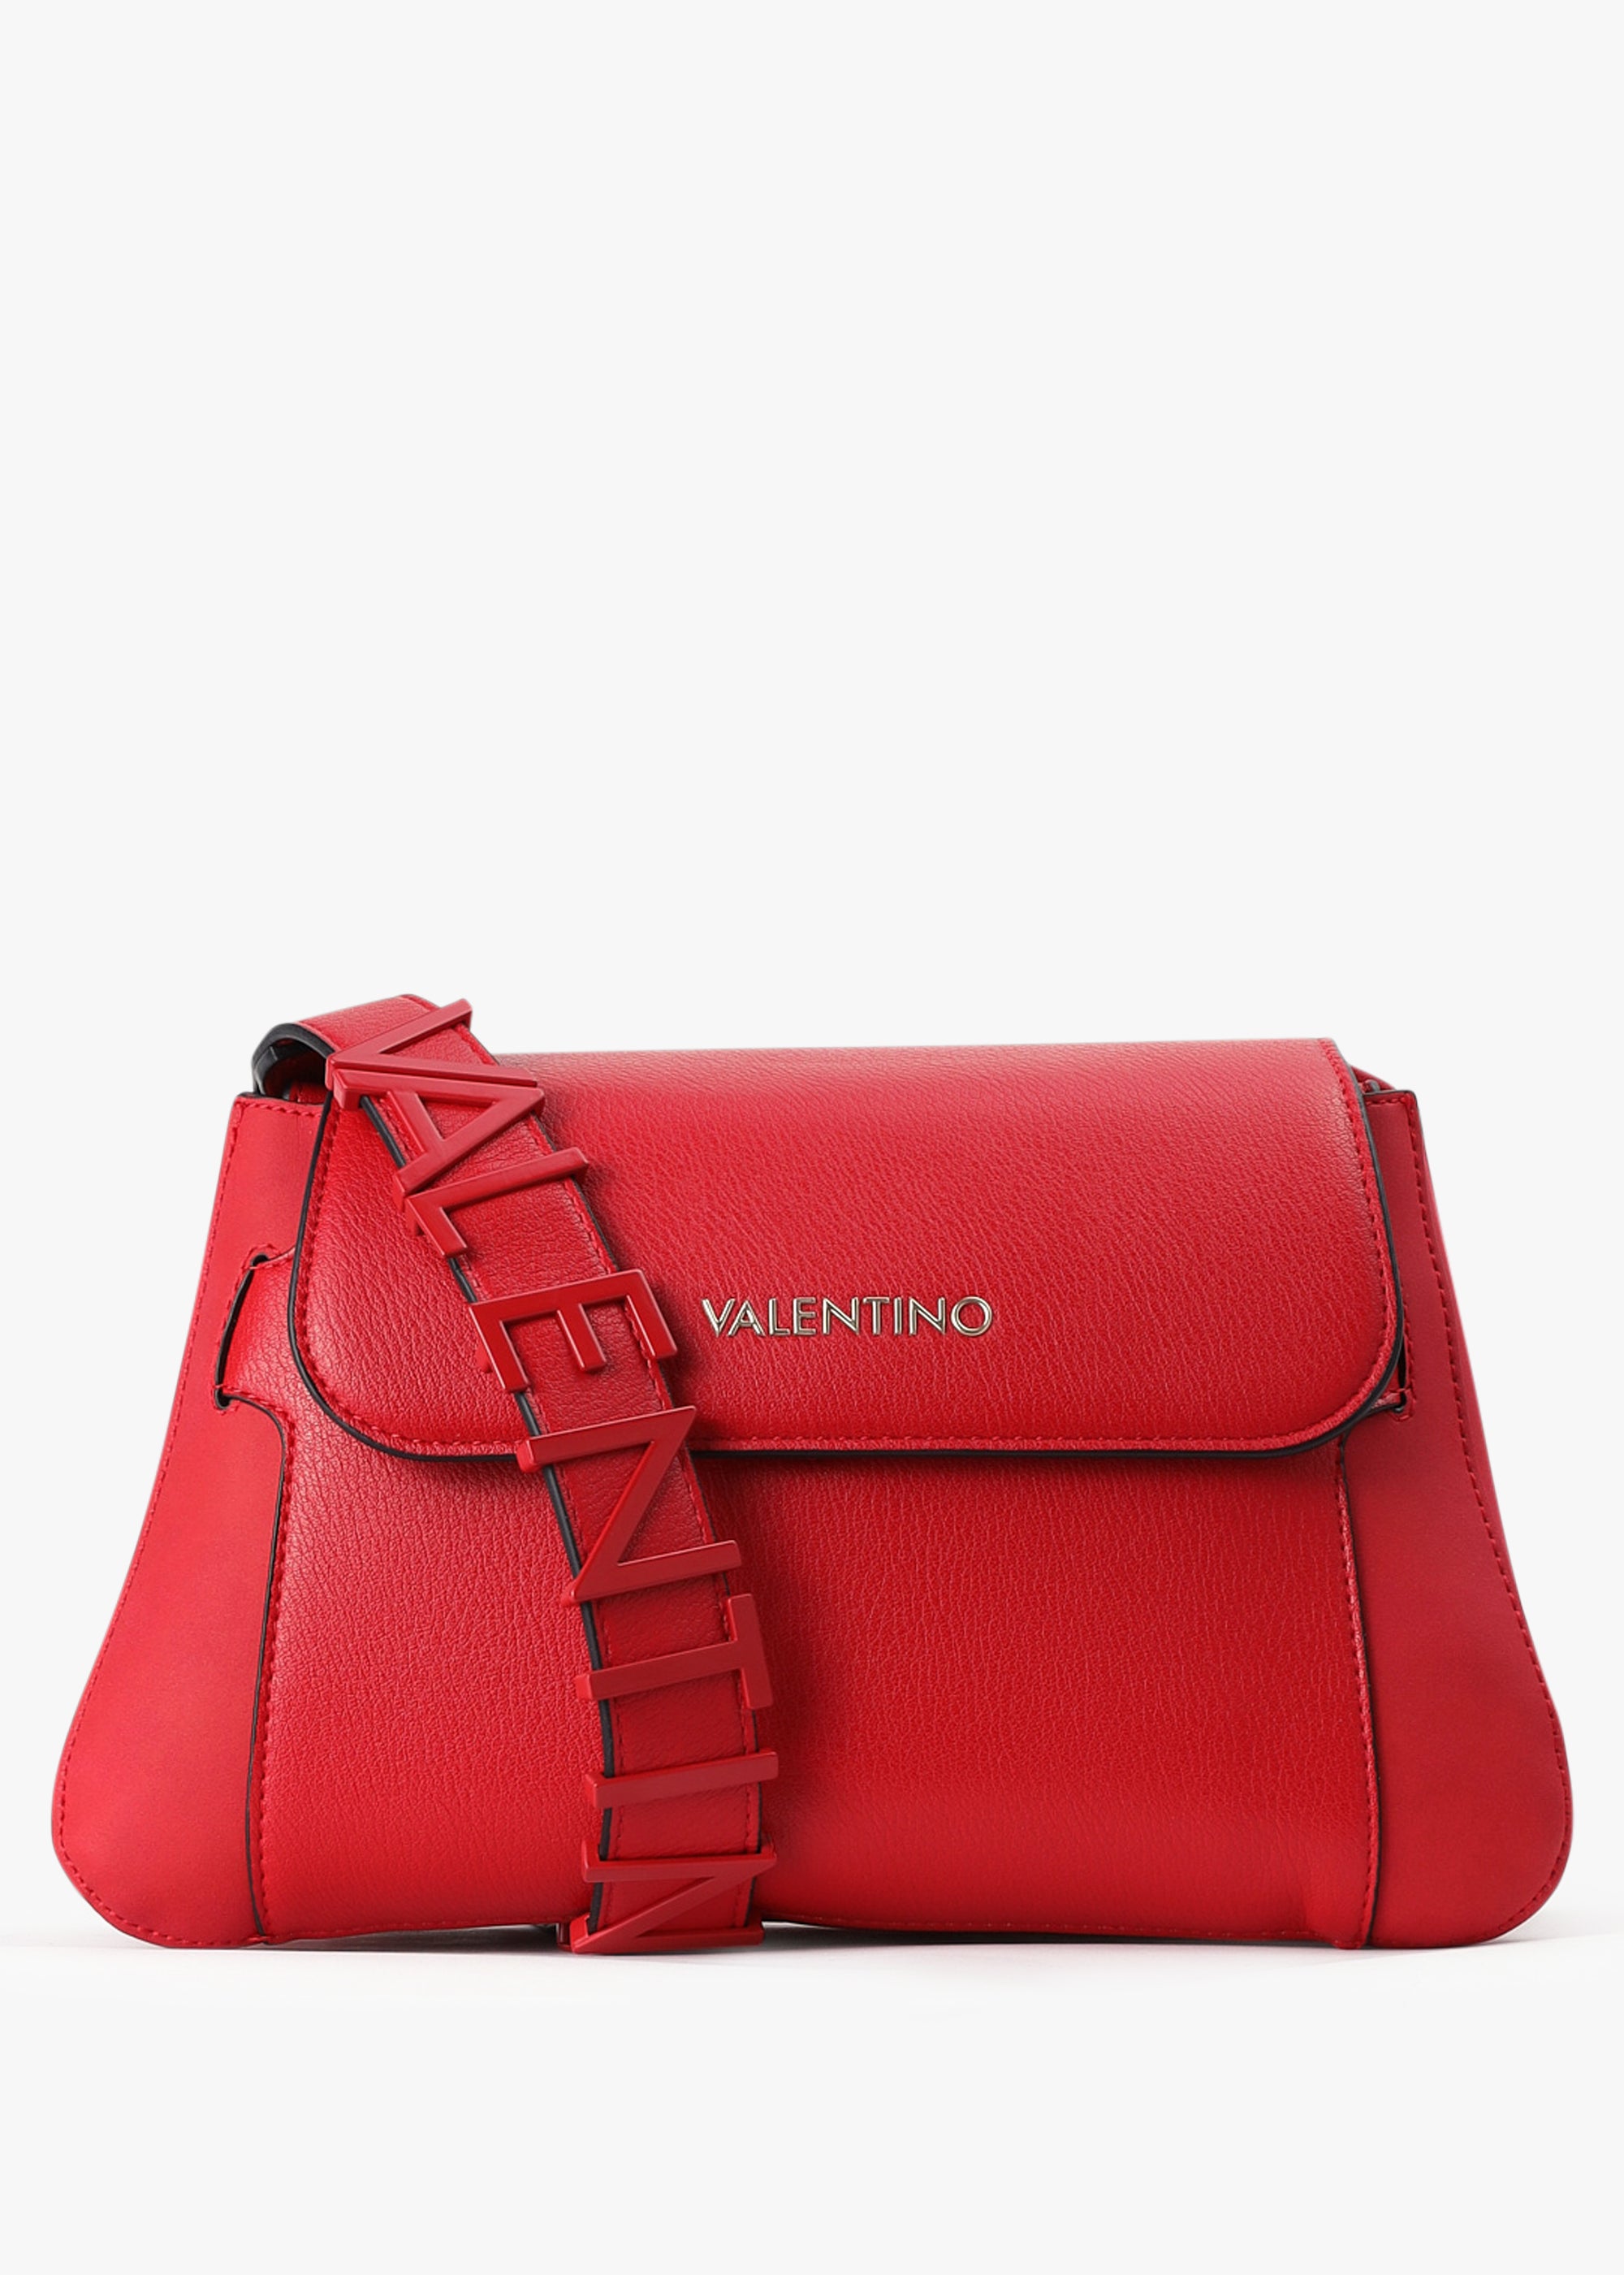 Image of Valentino Bags Womens Innsbruck Top Flap Shoulder Bag In Rosso